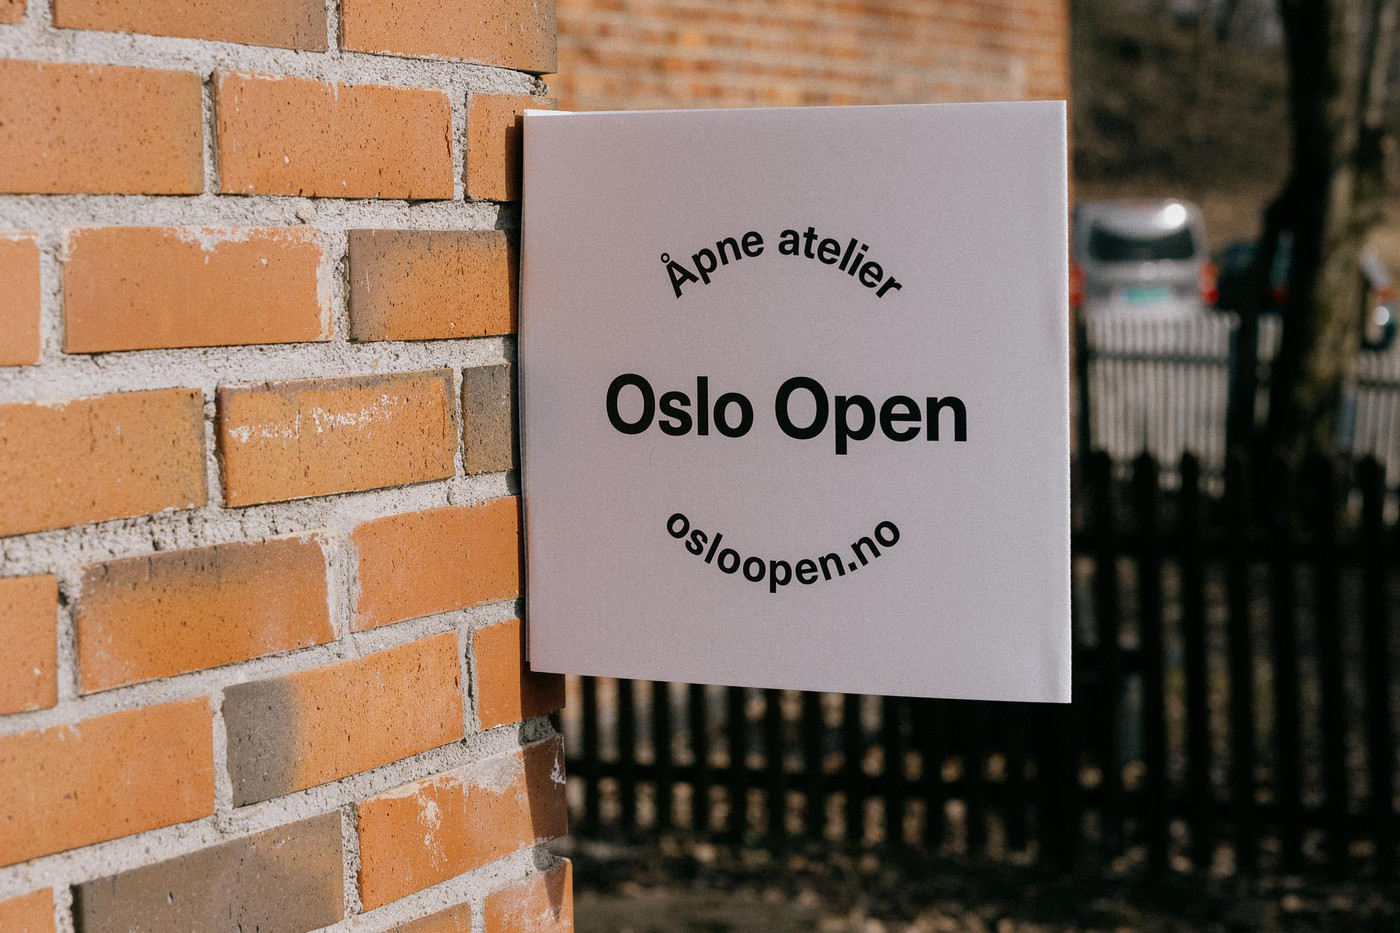 A white sign reading "Åpne atelier - Oslo Open" hanging from a brick wall.